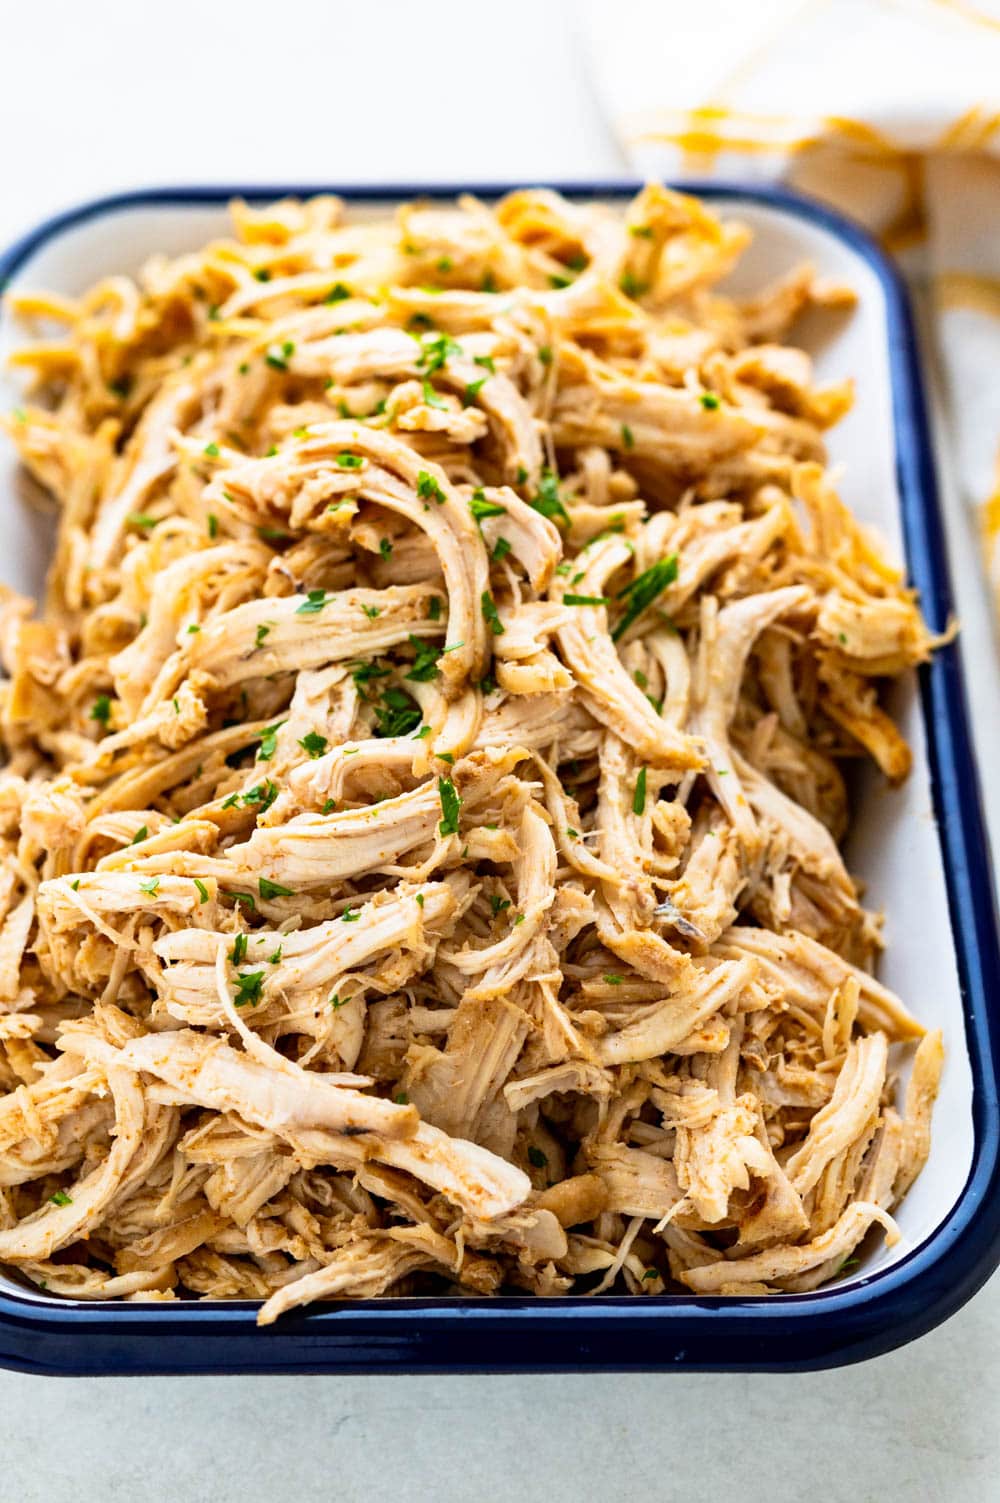 Pulled chicken in a serving dish.